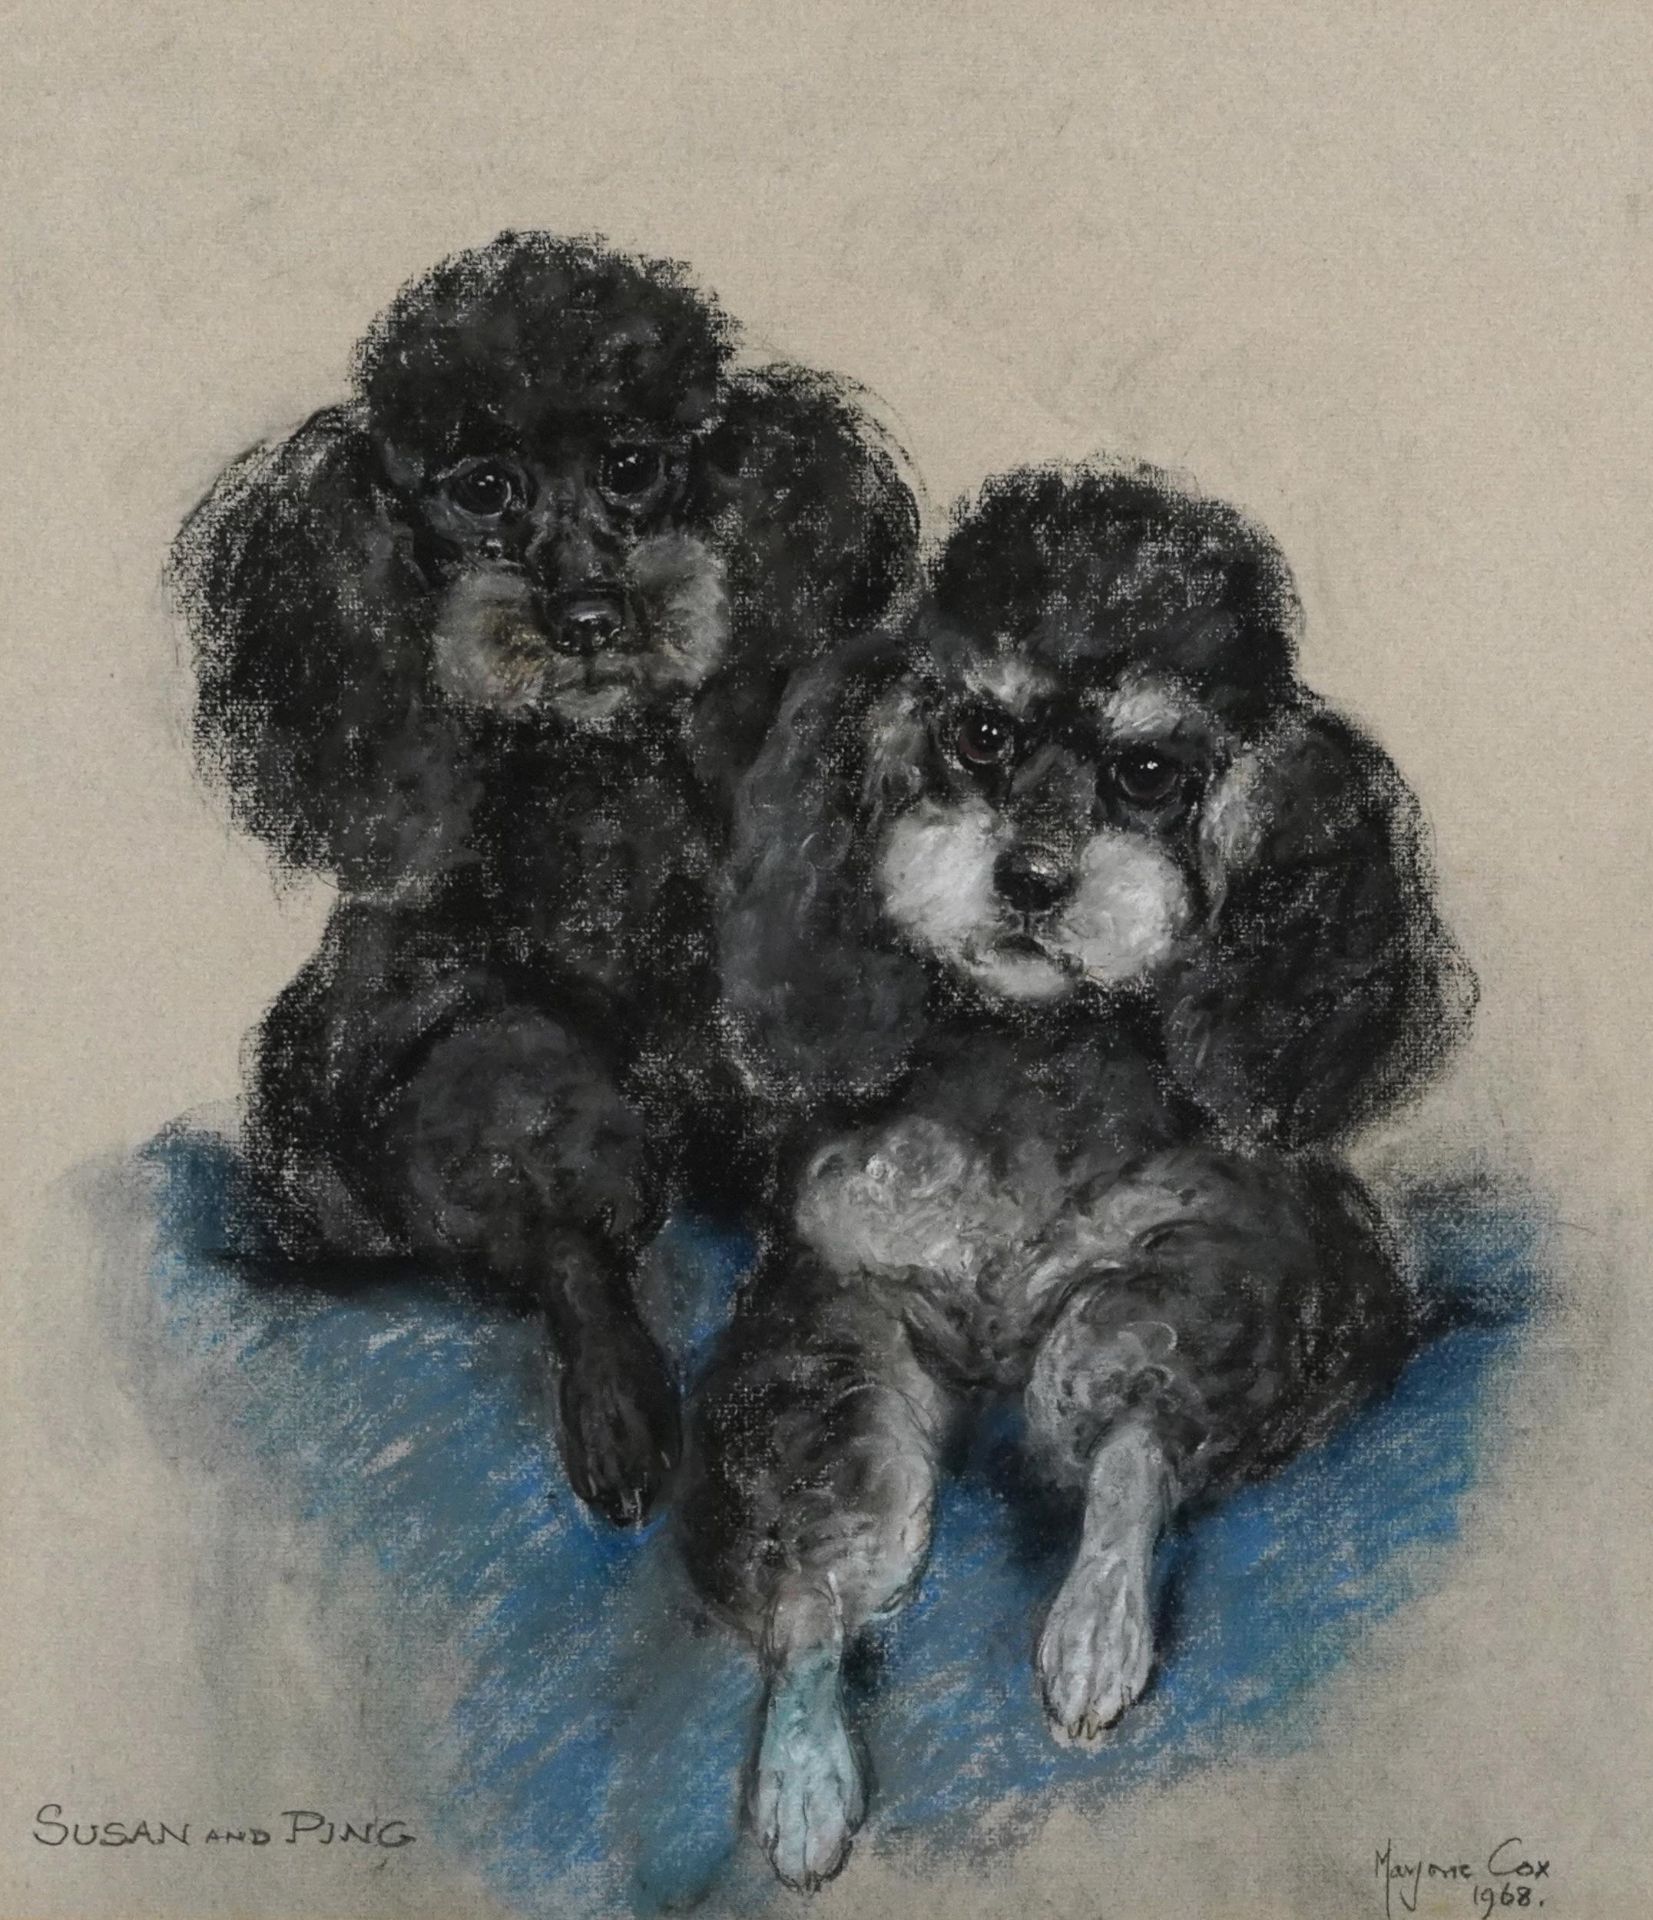 Marjorie Cox 1968 - Portrait of two Poodles called Susan & Ping, signed pastel, mounted, framed